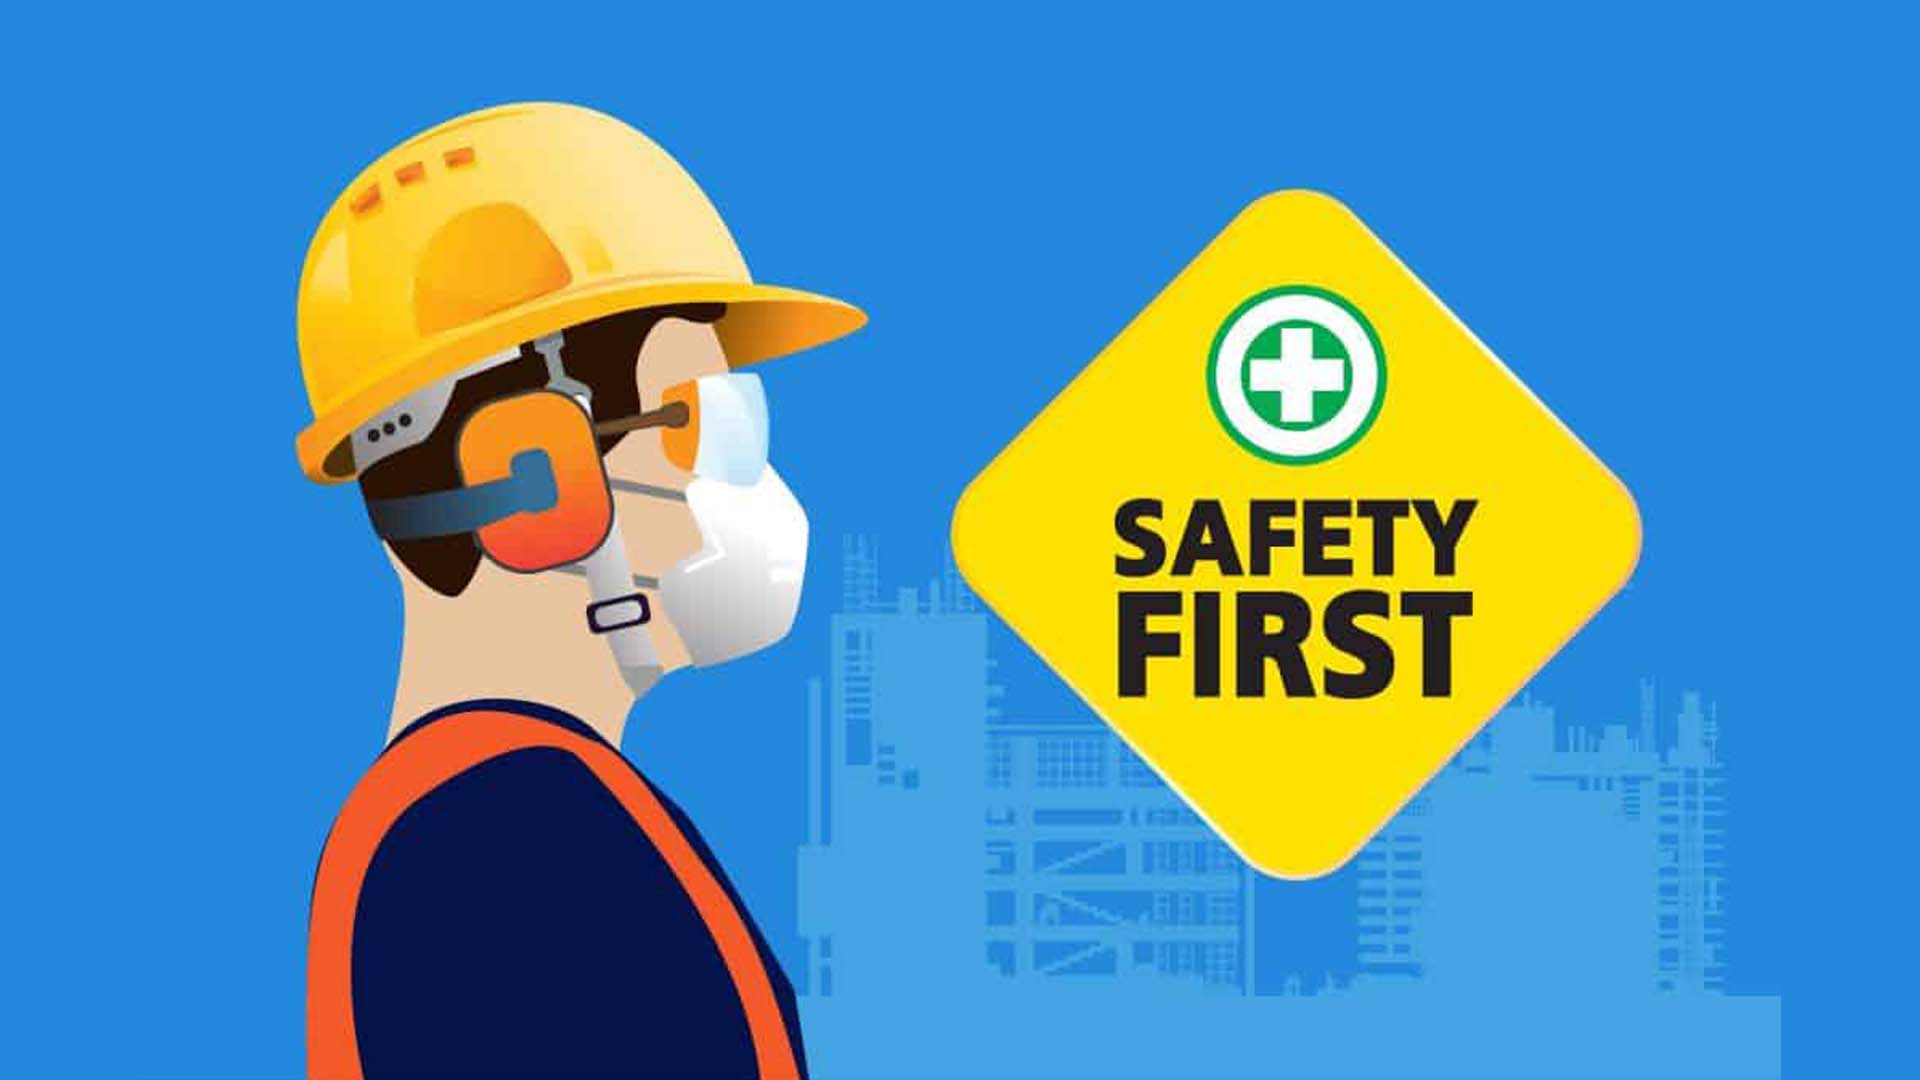 Environmental Health & Safety Seeks to Minimize or Eliminate Risks in the Workplace